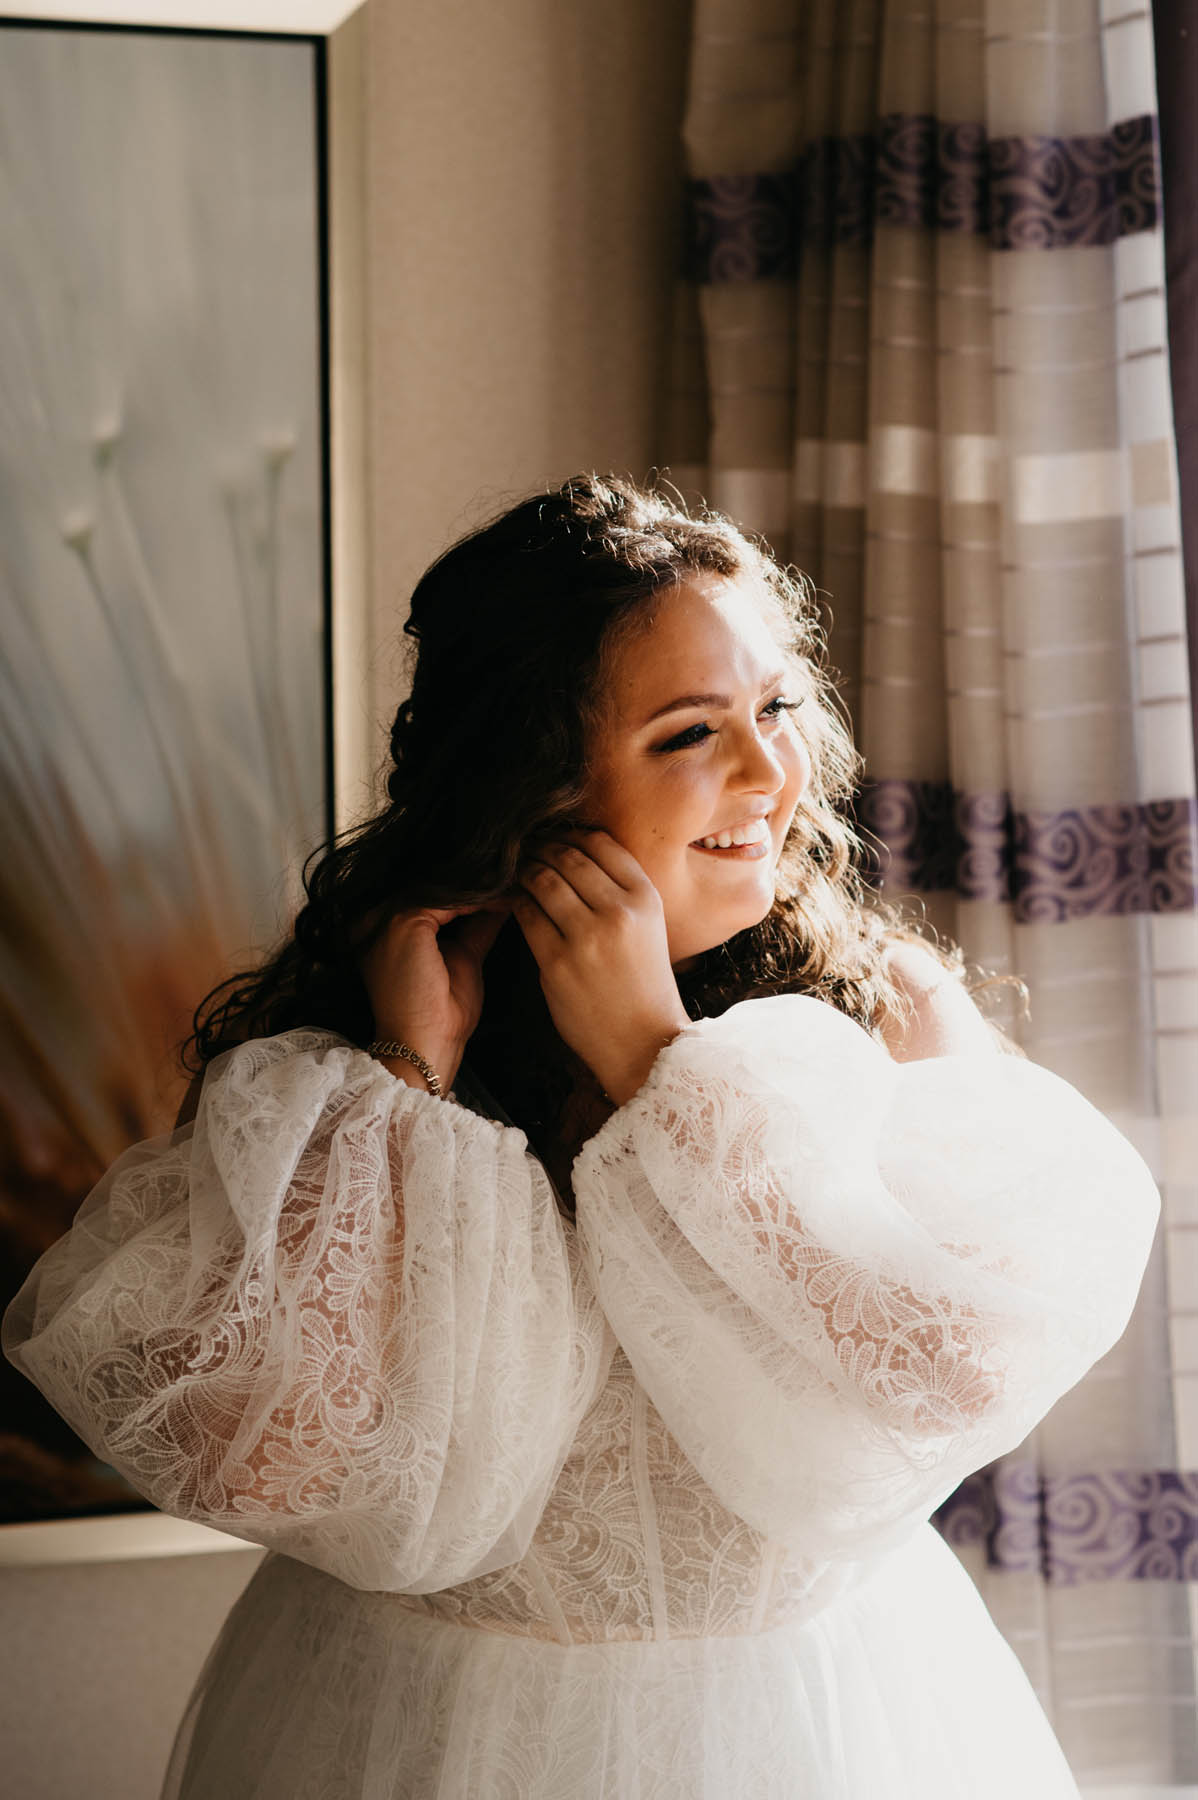 A white brunette gets ready for their wedding in front of a sunny window.